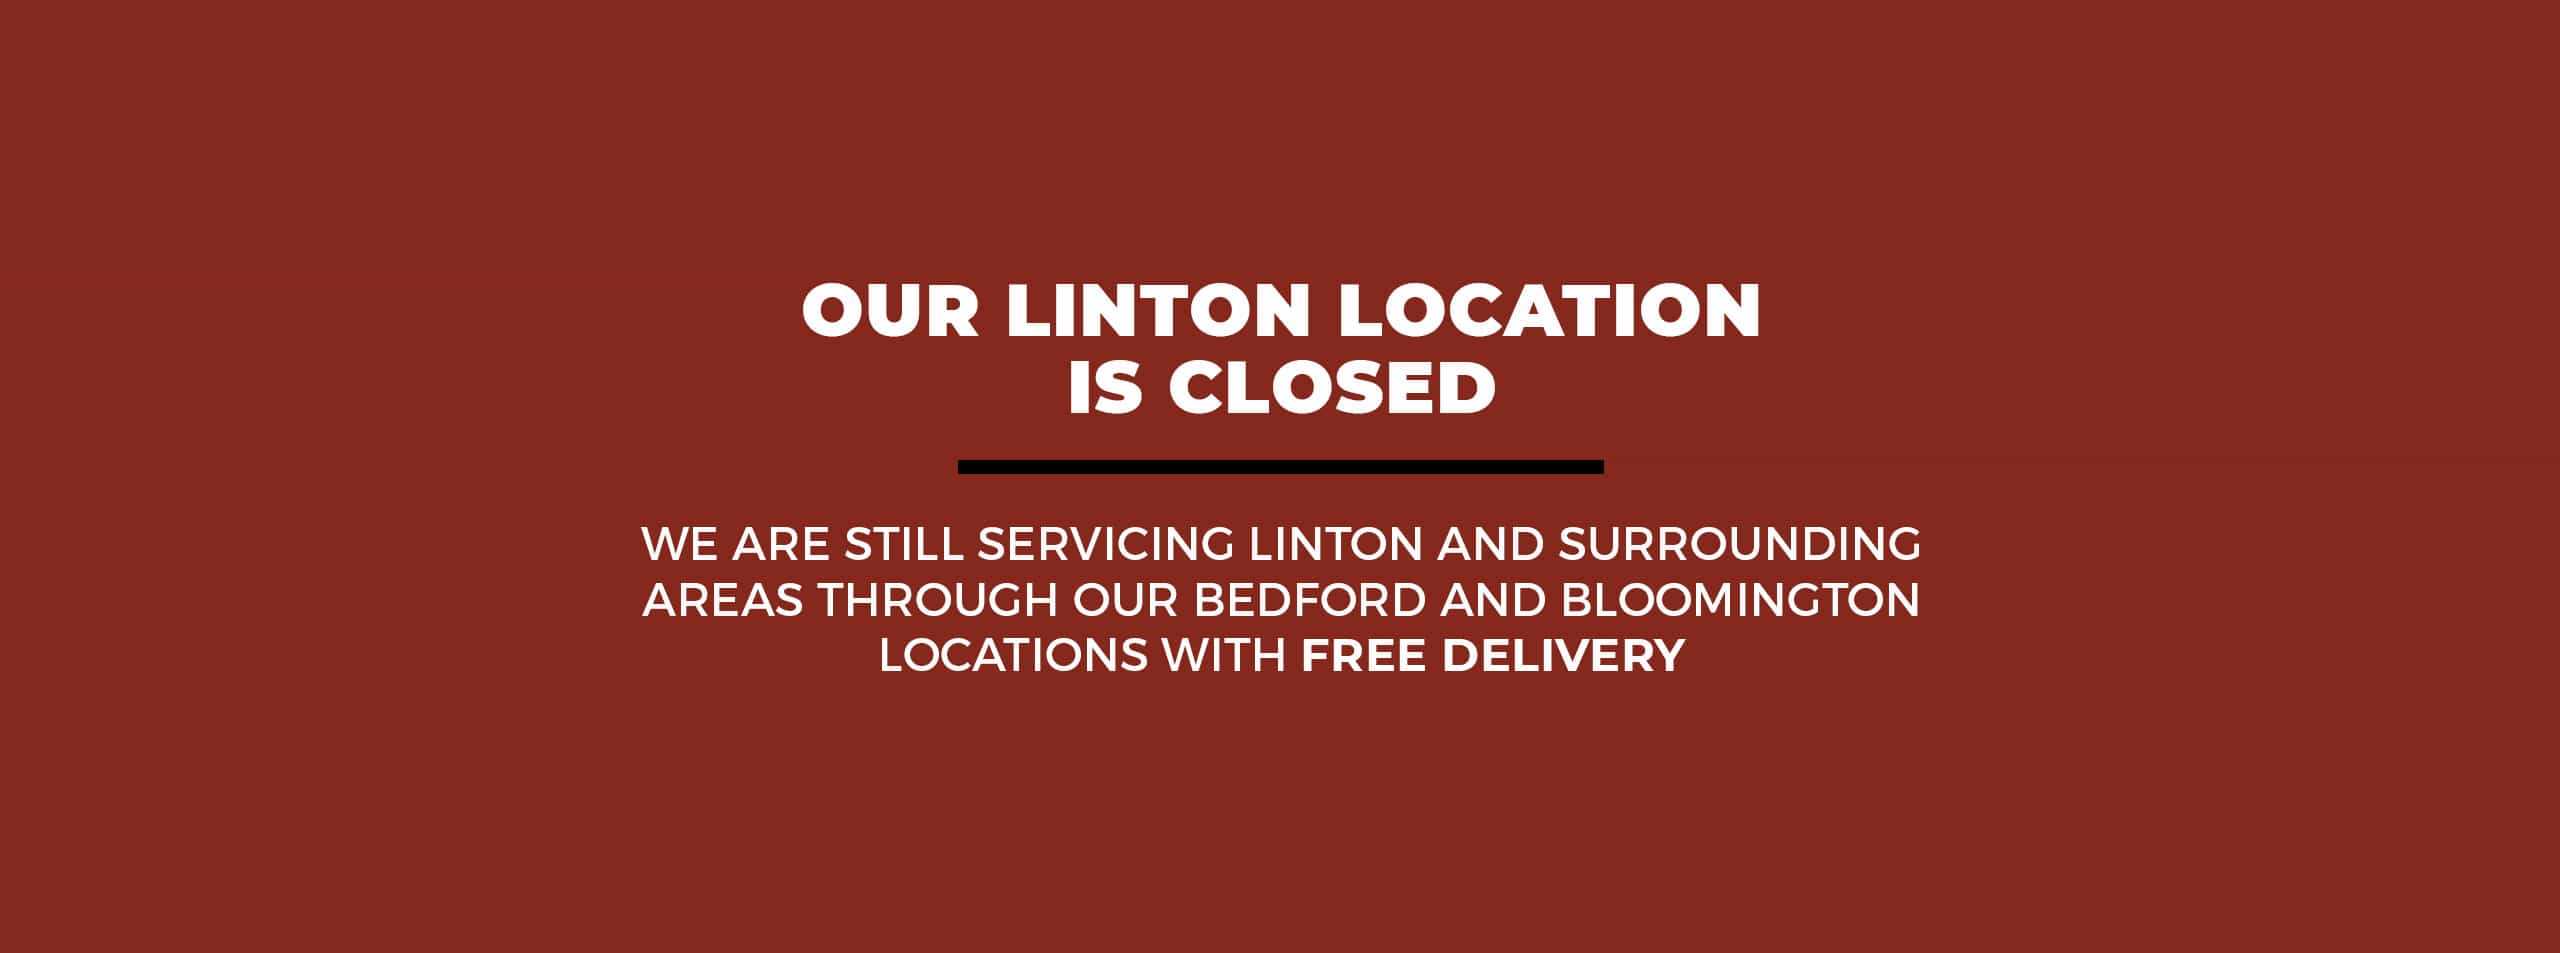 Linton Location is Closed - See Available Locations